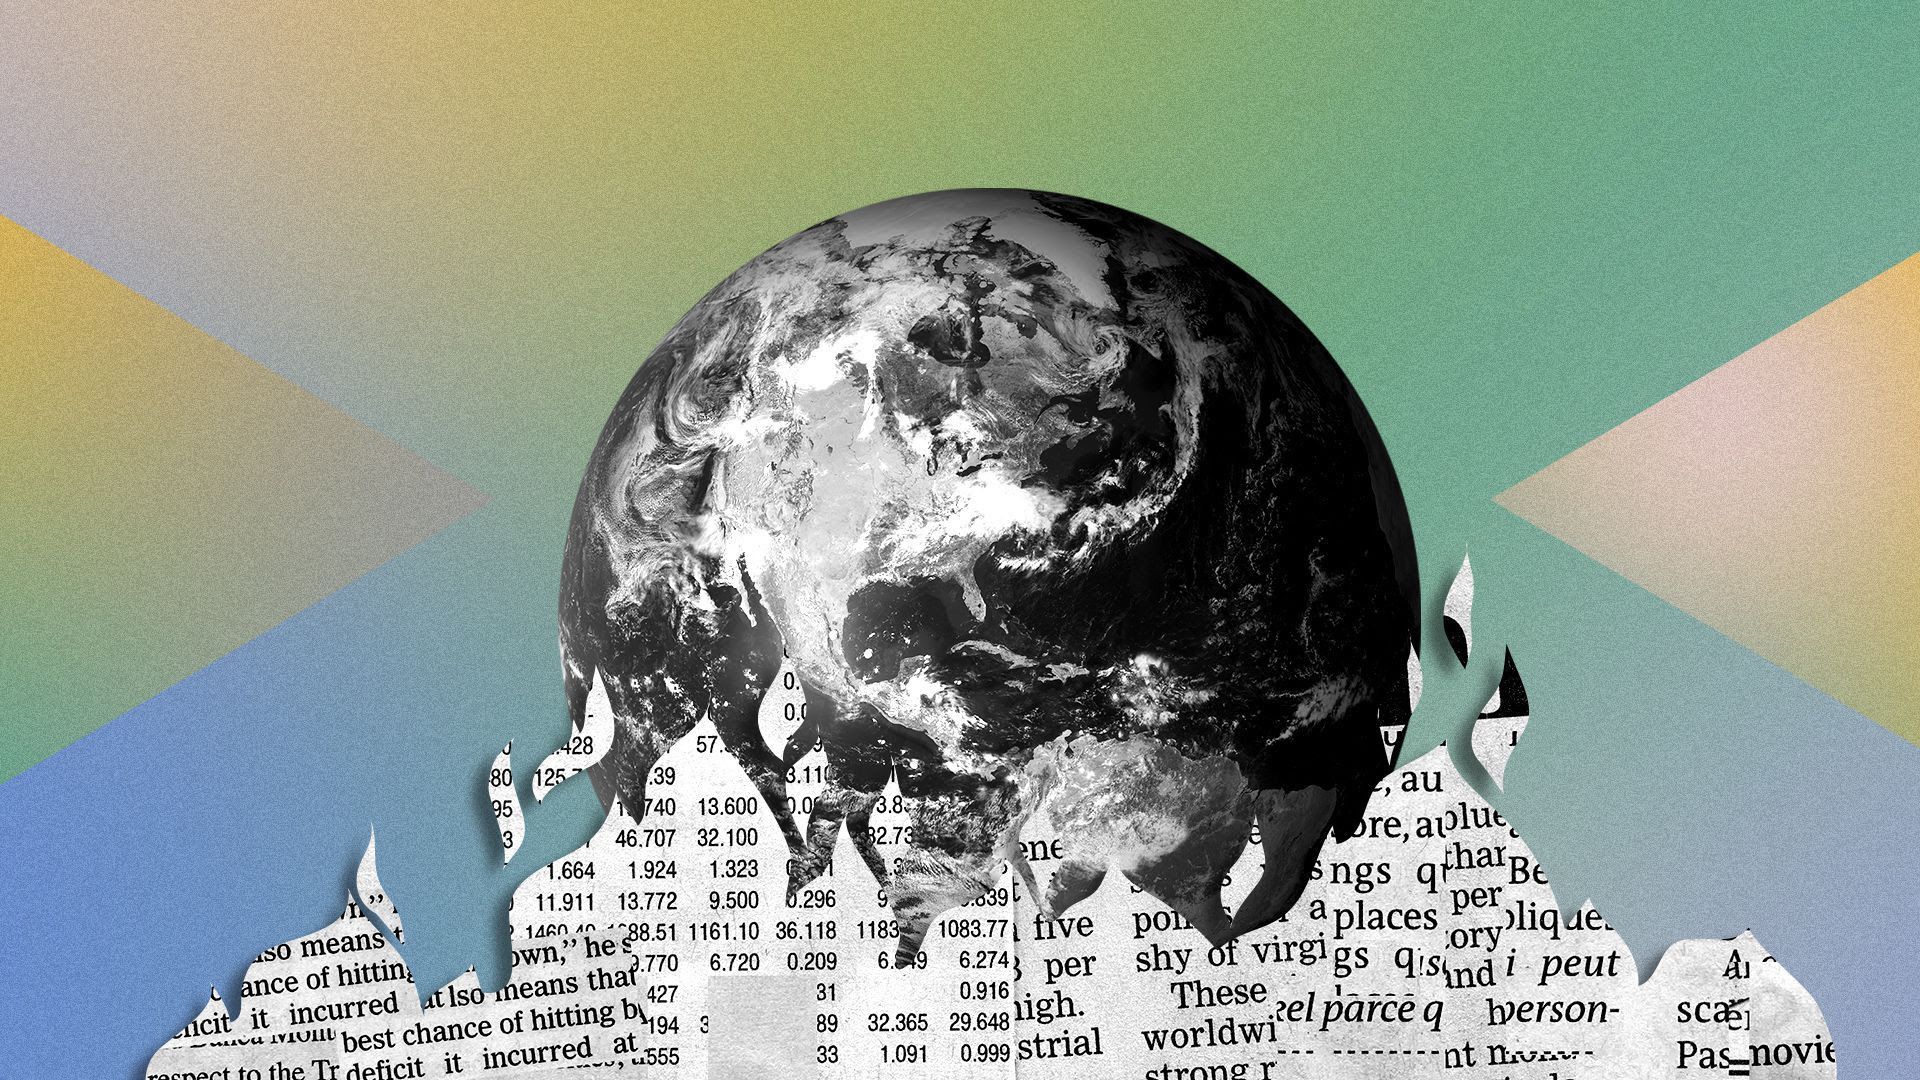 Illustration of a globe with newspaper pieces in flames below it.